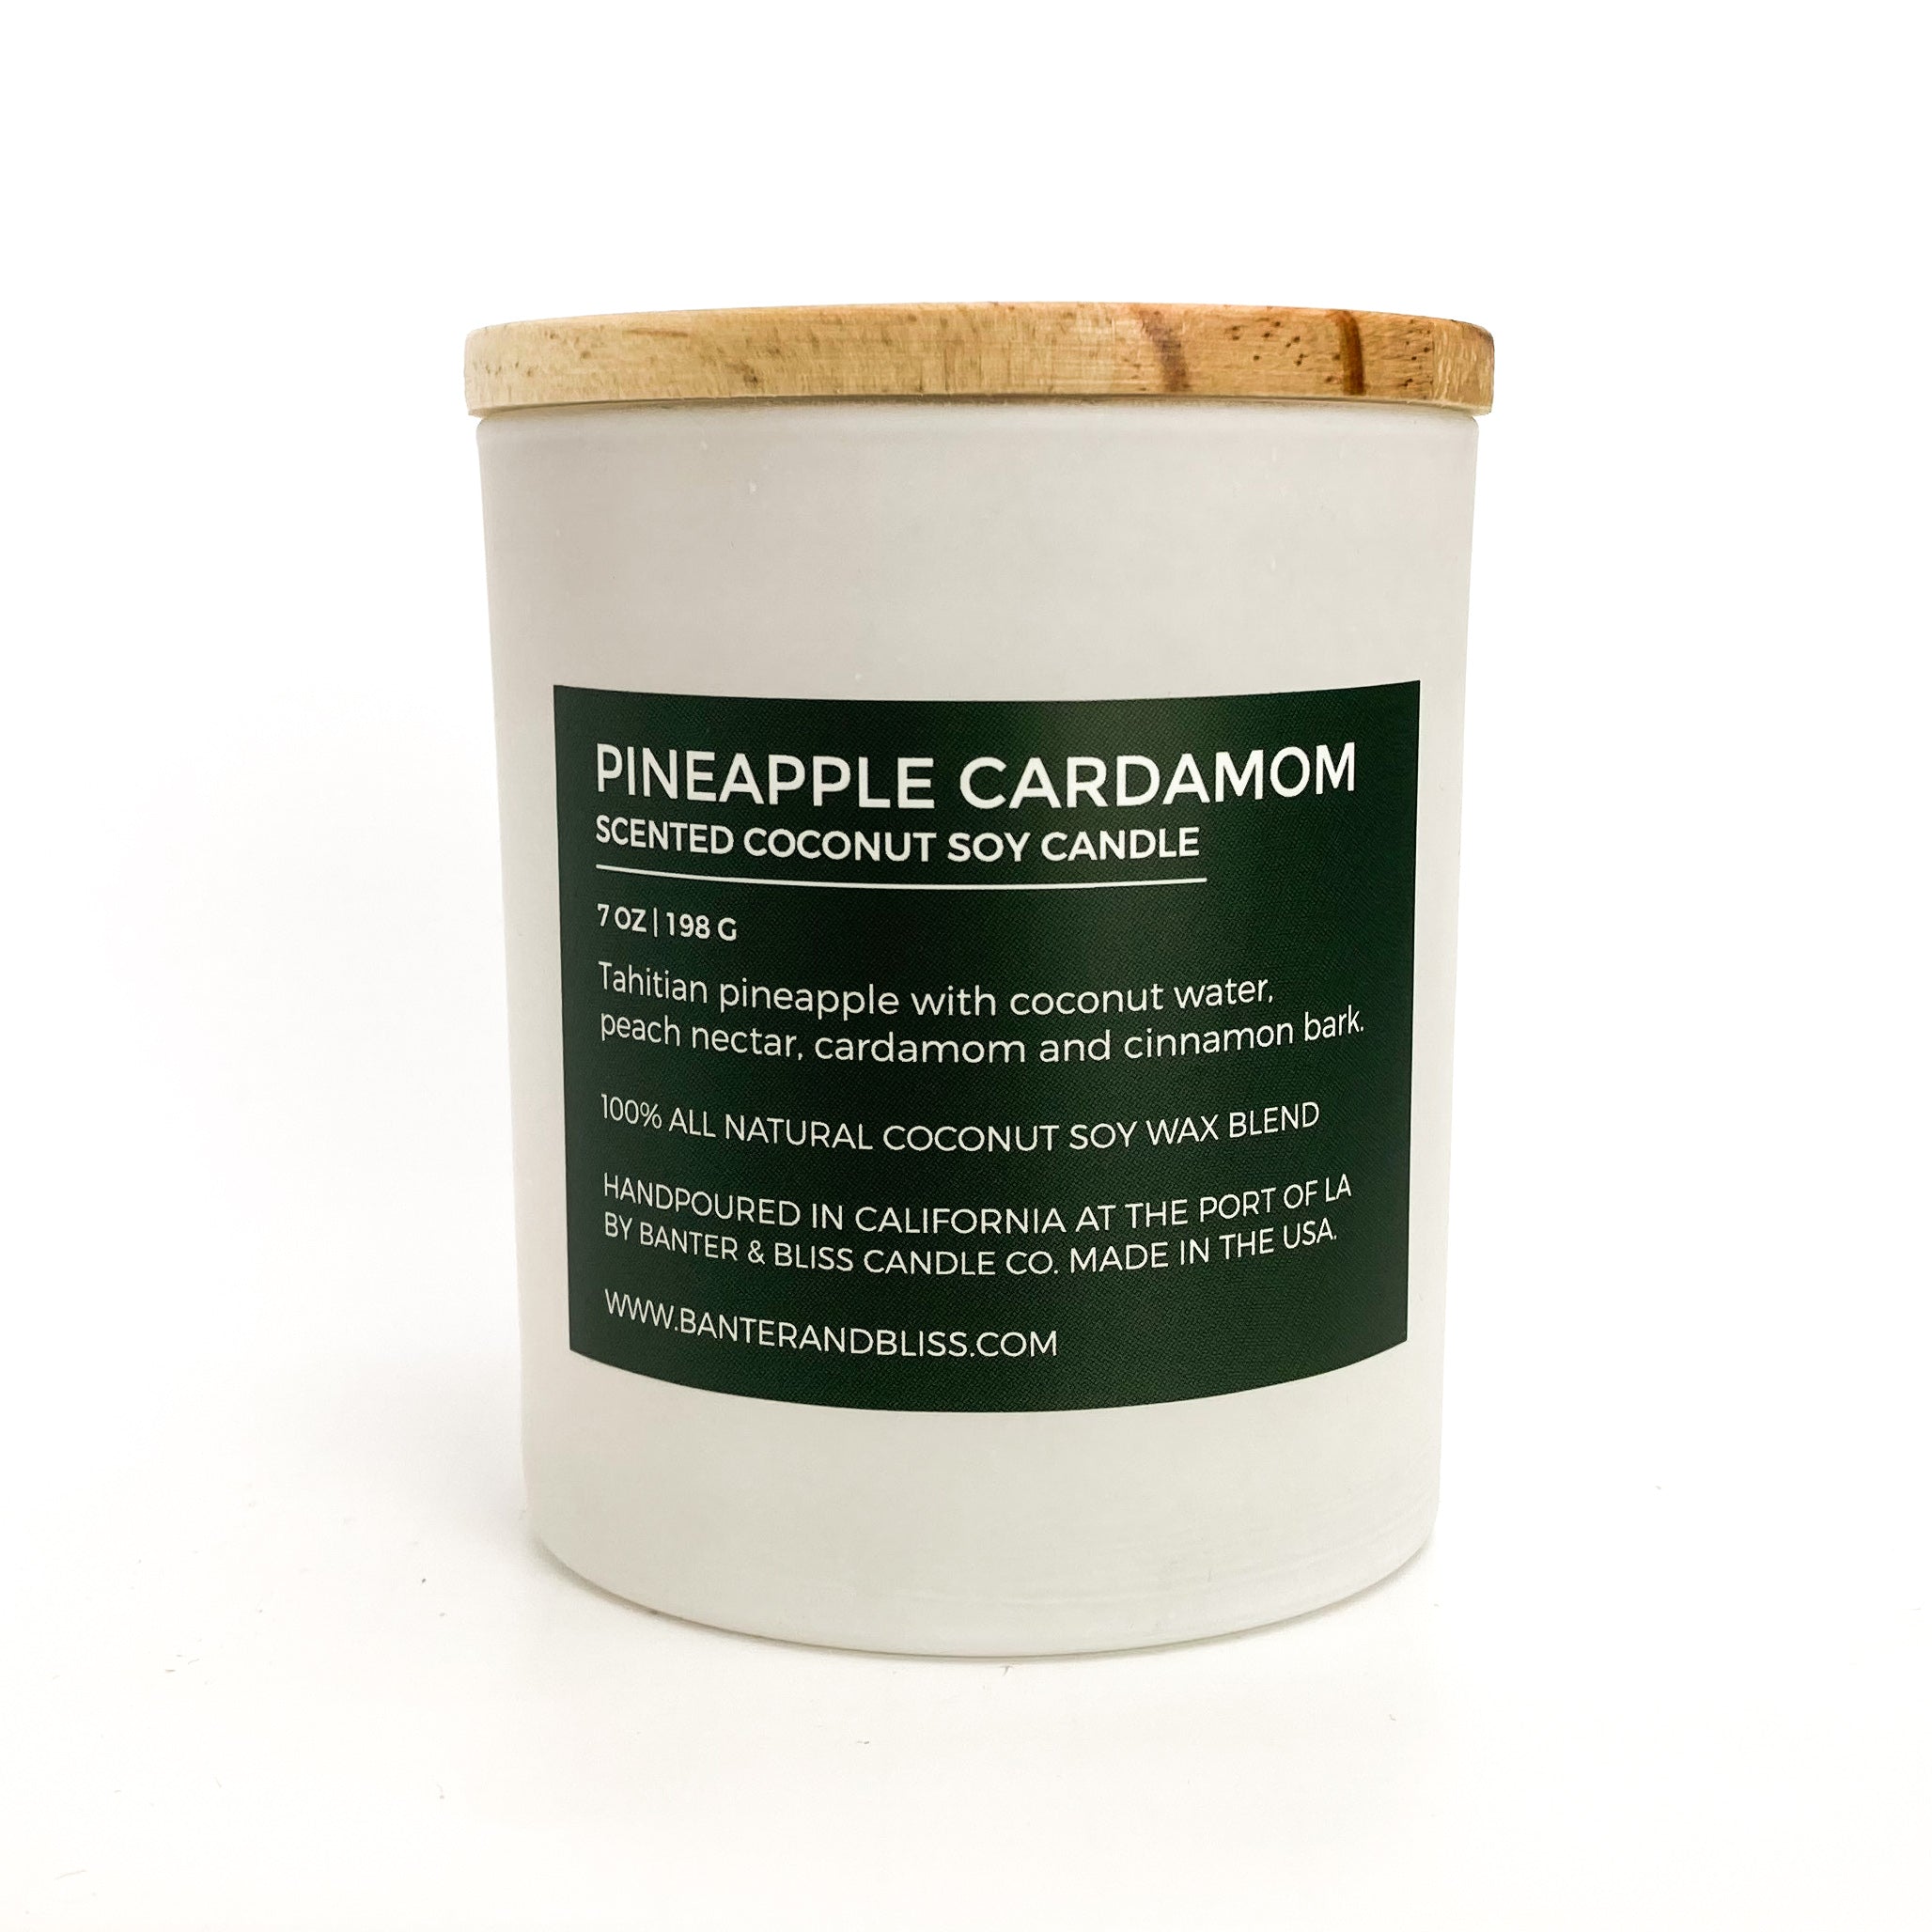 Pineapple Cardamom. 7 oz. Scented Coconut Soy Candle.